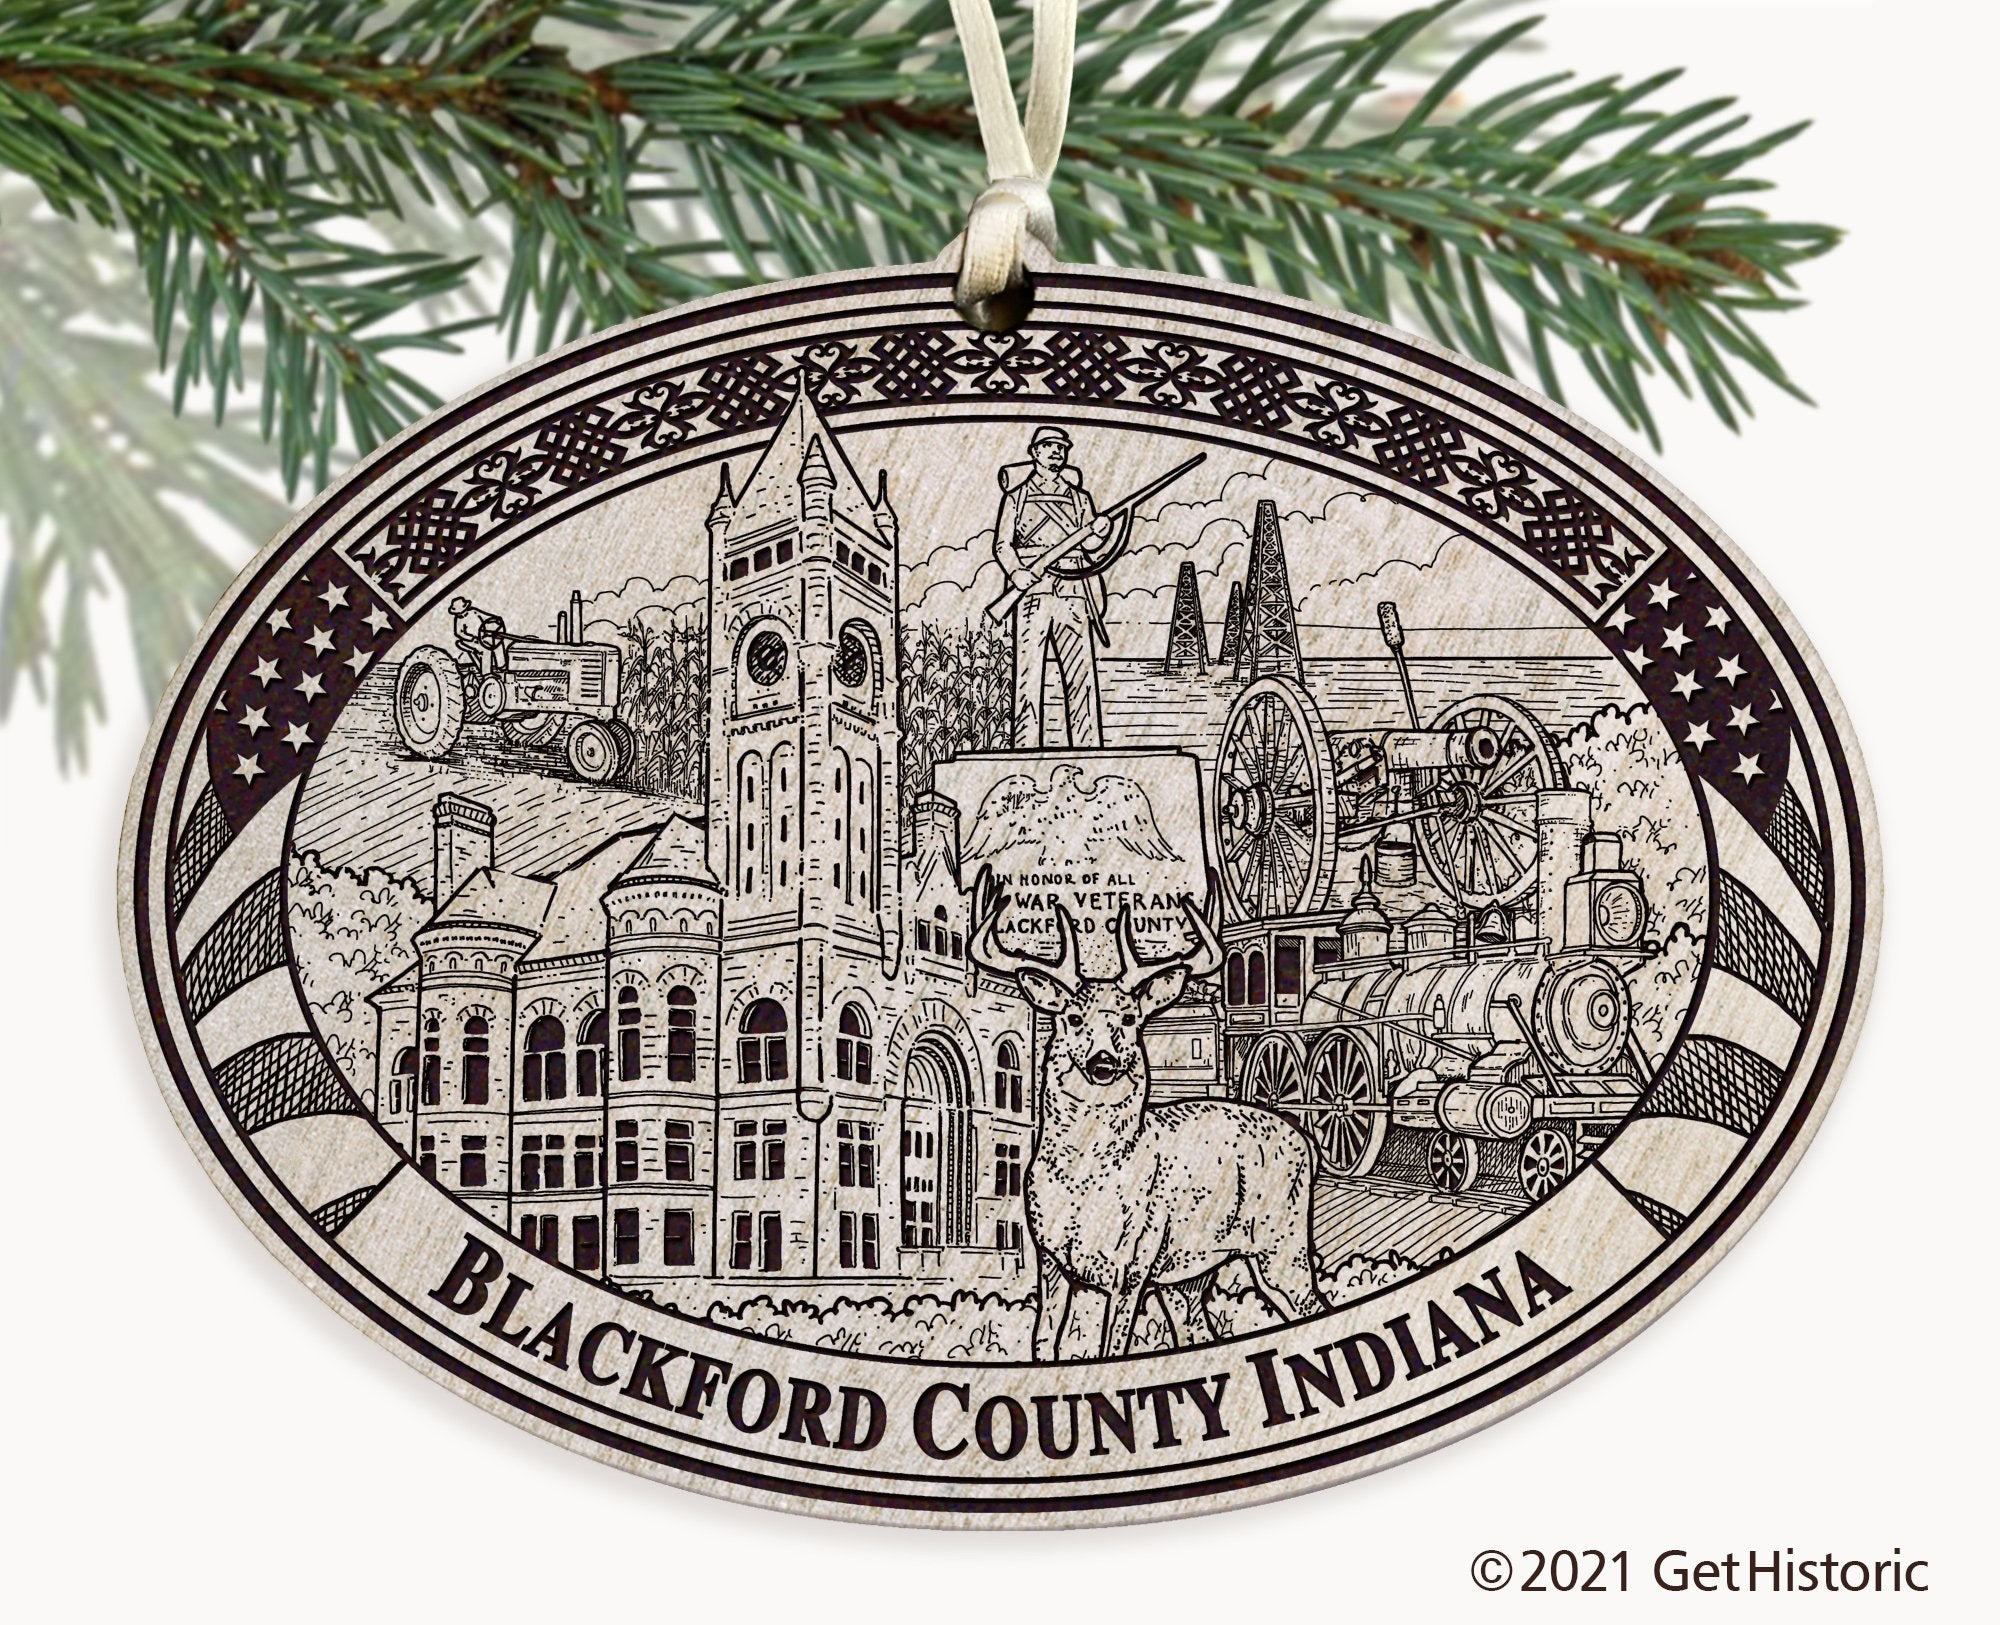 Blackford County Indiana Engraved Ornament